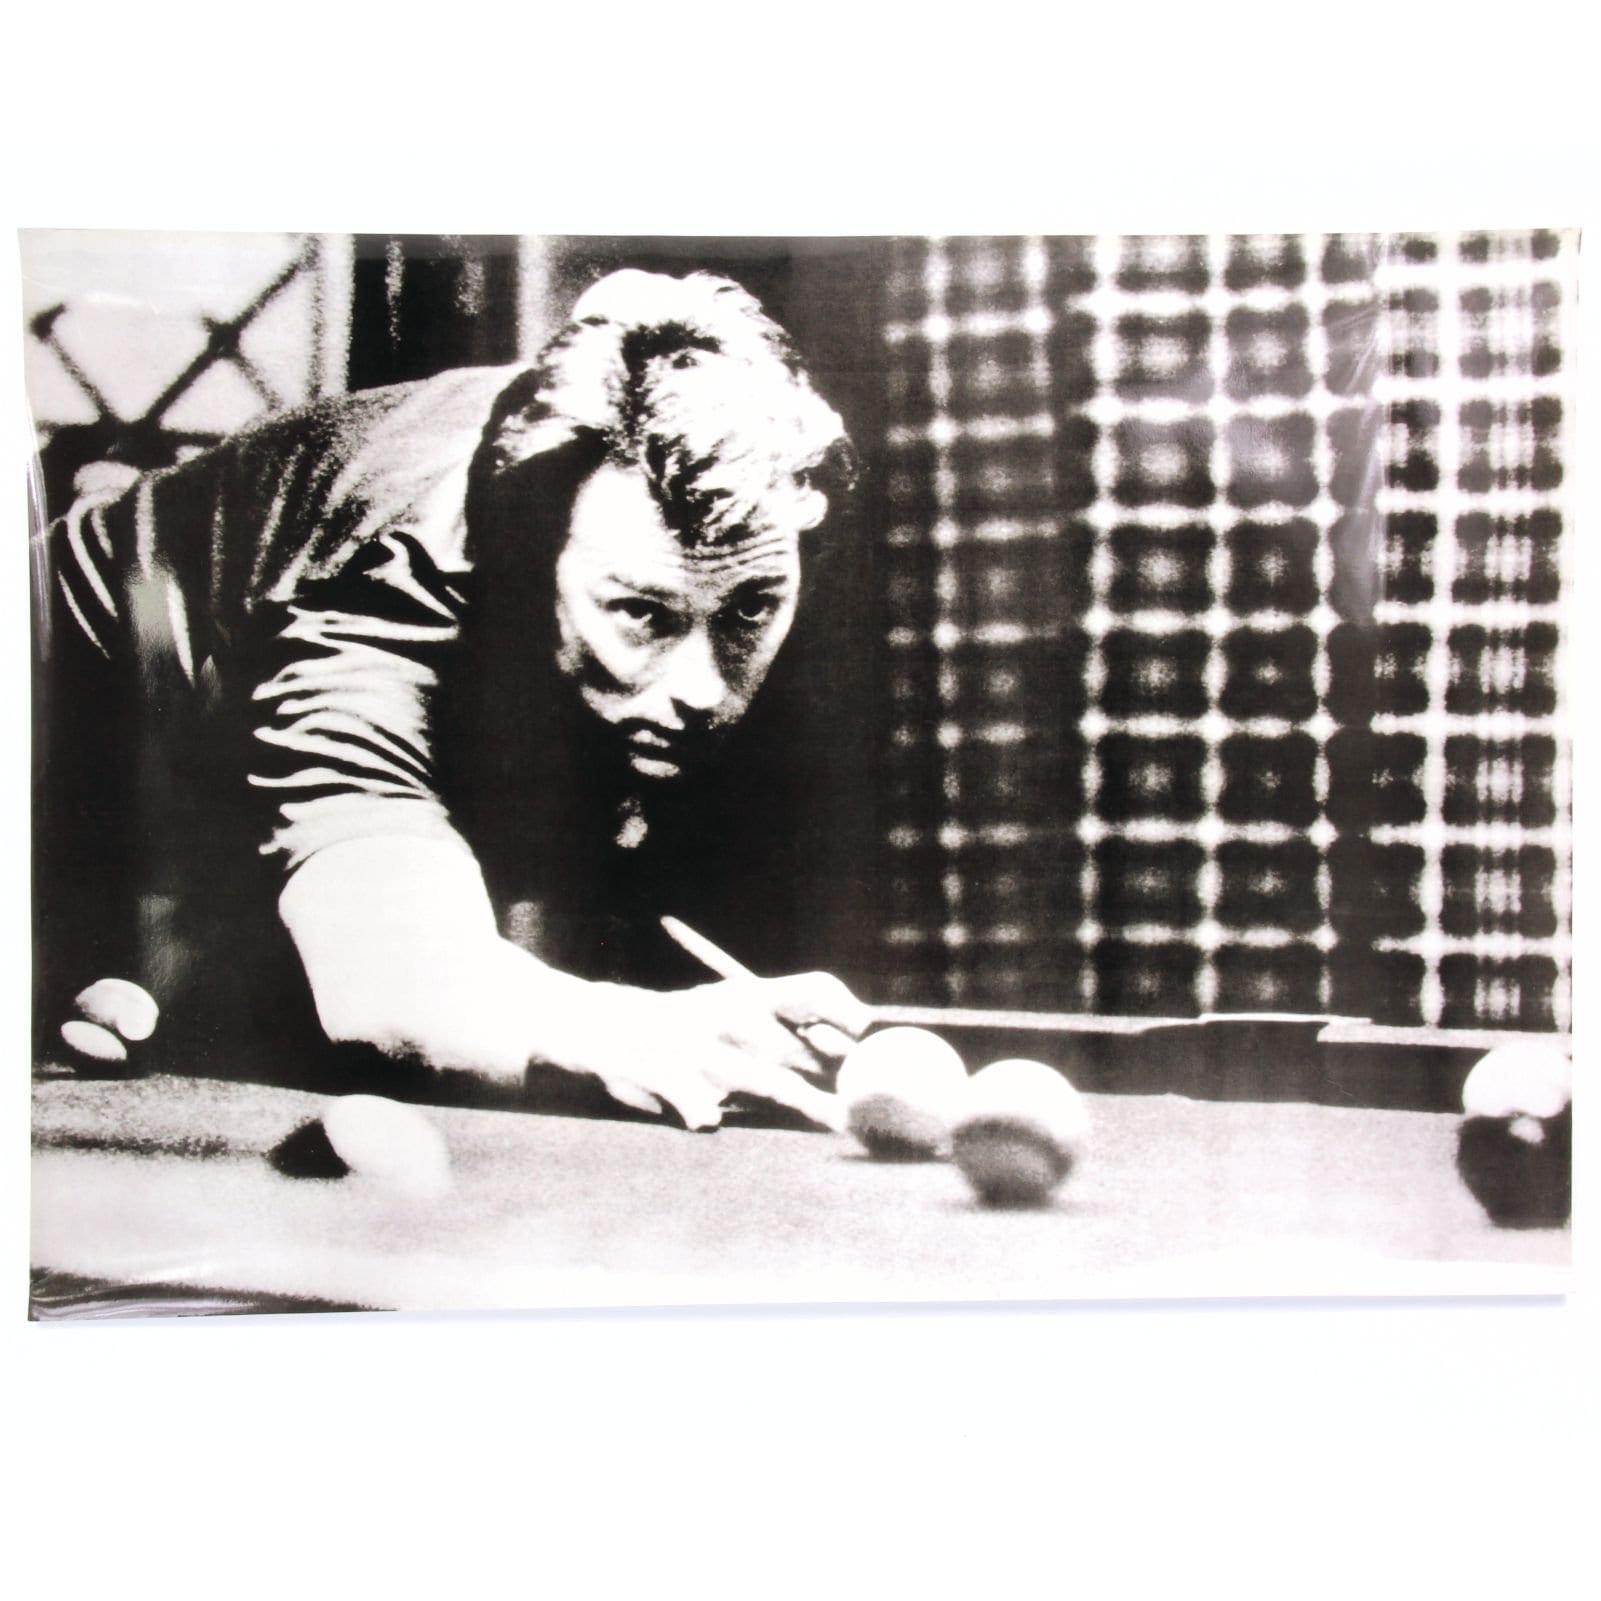 CLINT EASTWOOD Playing Pool – Back and White POSTER PRINT